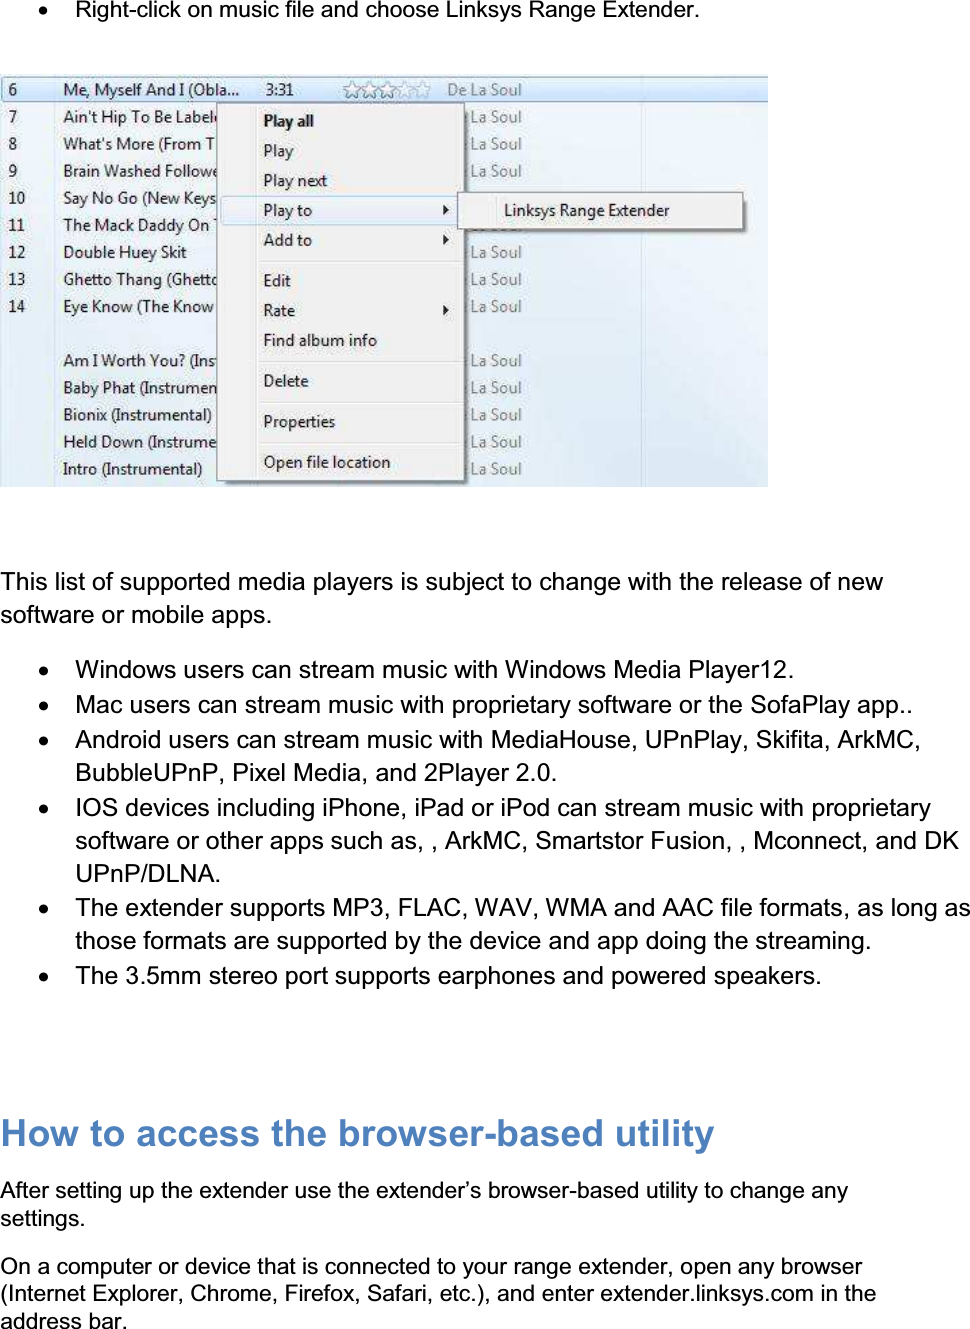 x  Right-click on music file and choose Linksys Range Extender.     This list of supported media players is subject to change with the release of new software or mobile apps. x  Windows users can stream music with Windows Media Player12.  x  Mac users can stream music with proprietary software or the SofaPlay app.. x  Android users can stream music with MediaHouse, UPnPlay, Skifita, ArkMC, BubbleUPnP, Pixel Media, and 2Player 2.0. x  IOS devices including iPhone, iPad or iPod can stream music with proprietary software or other apps such as, , ArkMC, Smartstor Fusion, , Mconnect, and DK UPnP/DLNA. x  The extender supports MP3, FLAC, WAV, WMA and AAC file formats, as long as those formats are supported by the device and app doing the streaming. x  The 3.5mm stereo port supports earphones and powered speakers.   How to access the browser-based utility After setting up WKHH[WHQGHUXVHWKHH[WHQGHU¶VEURZVHU-based utility to change any settings. On a computer or device that is connected to your range extender, open any browser (Internet Explorer, Chrome, Firefox, Safari, etc.), and enter extender.linksys.com in the address bar. 